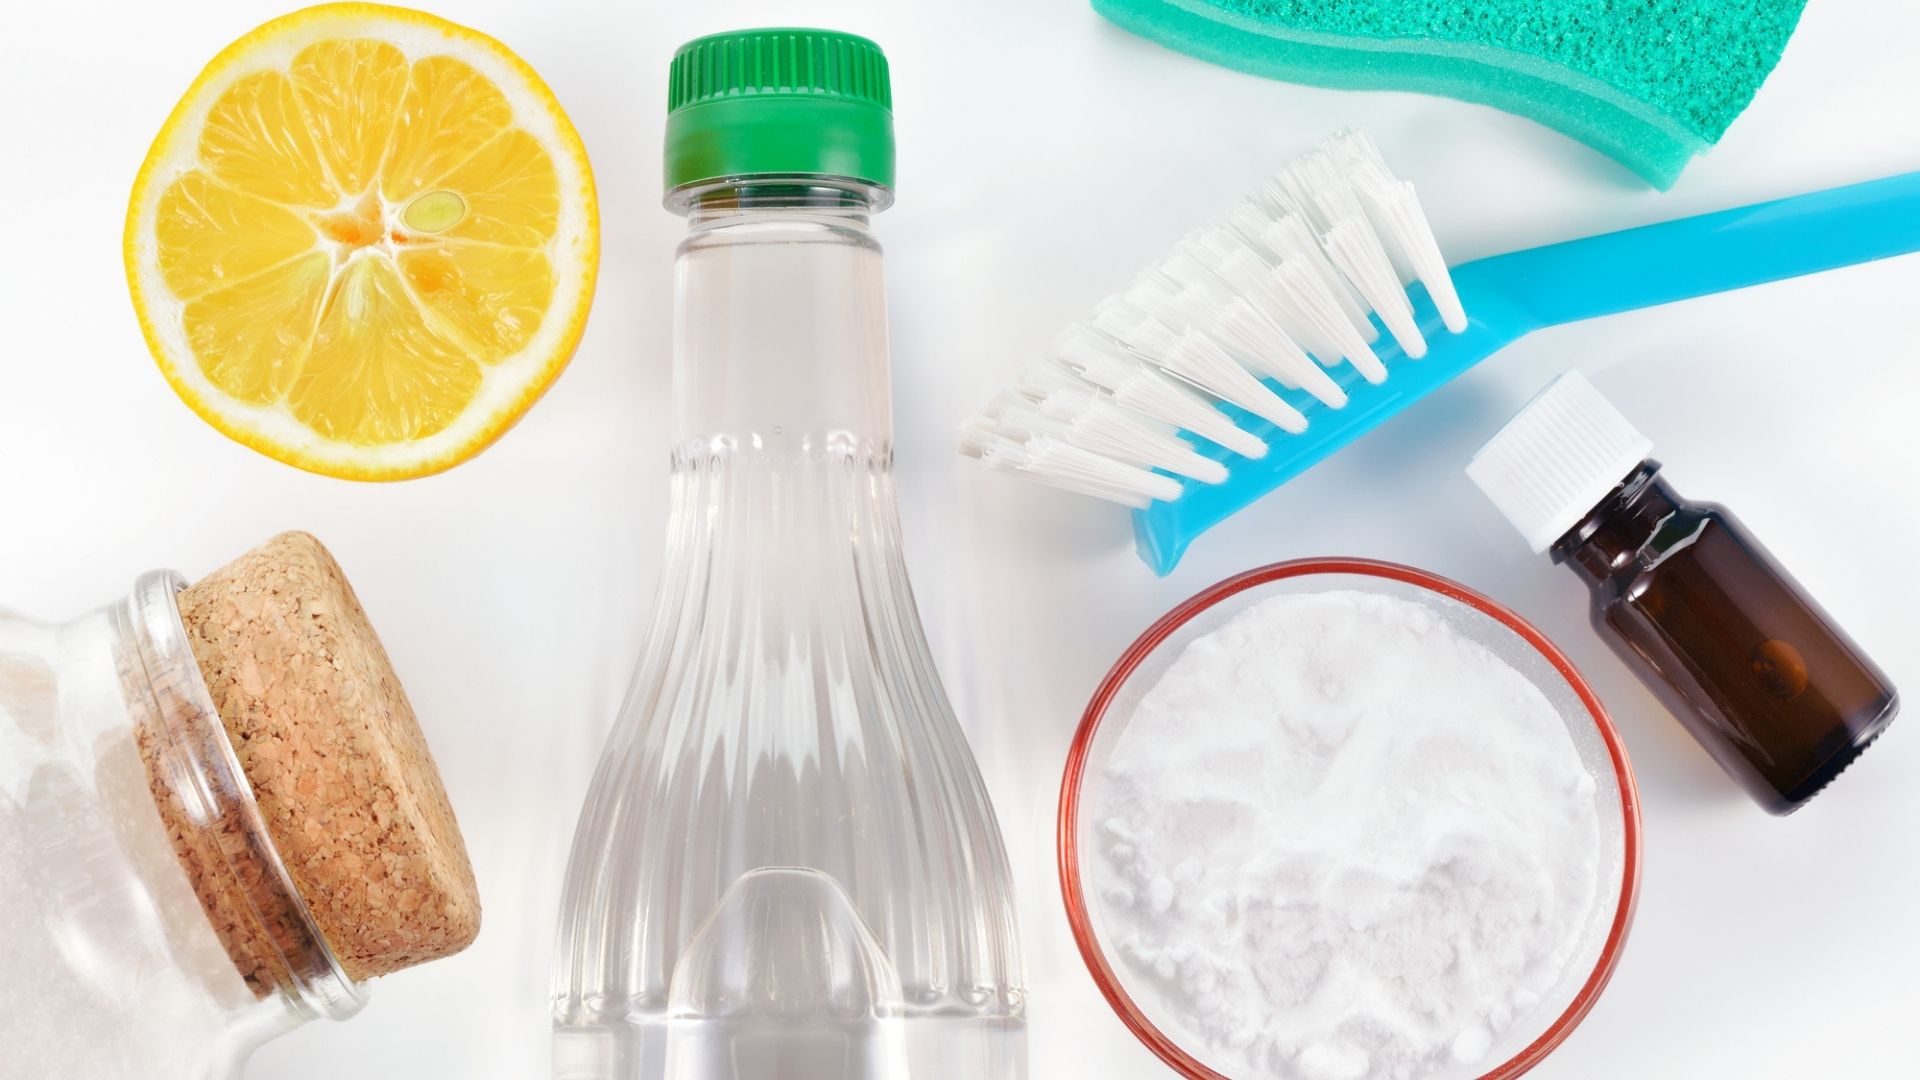 Essential Ingredients For Making Your Own Cleaning Products